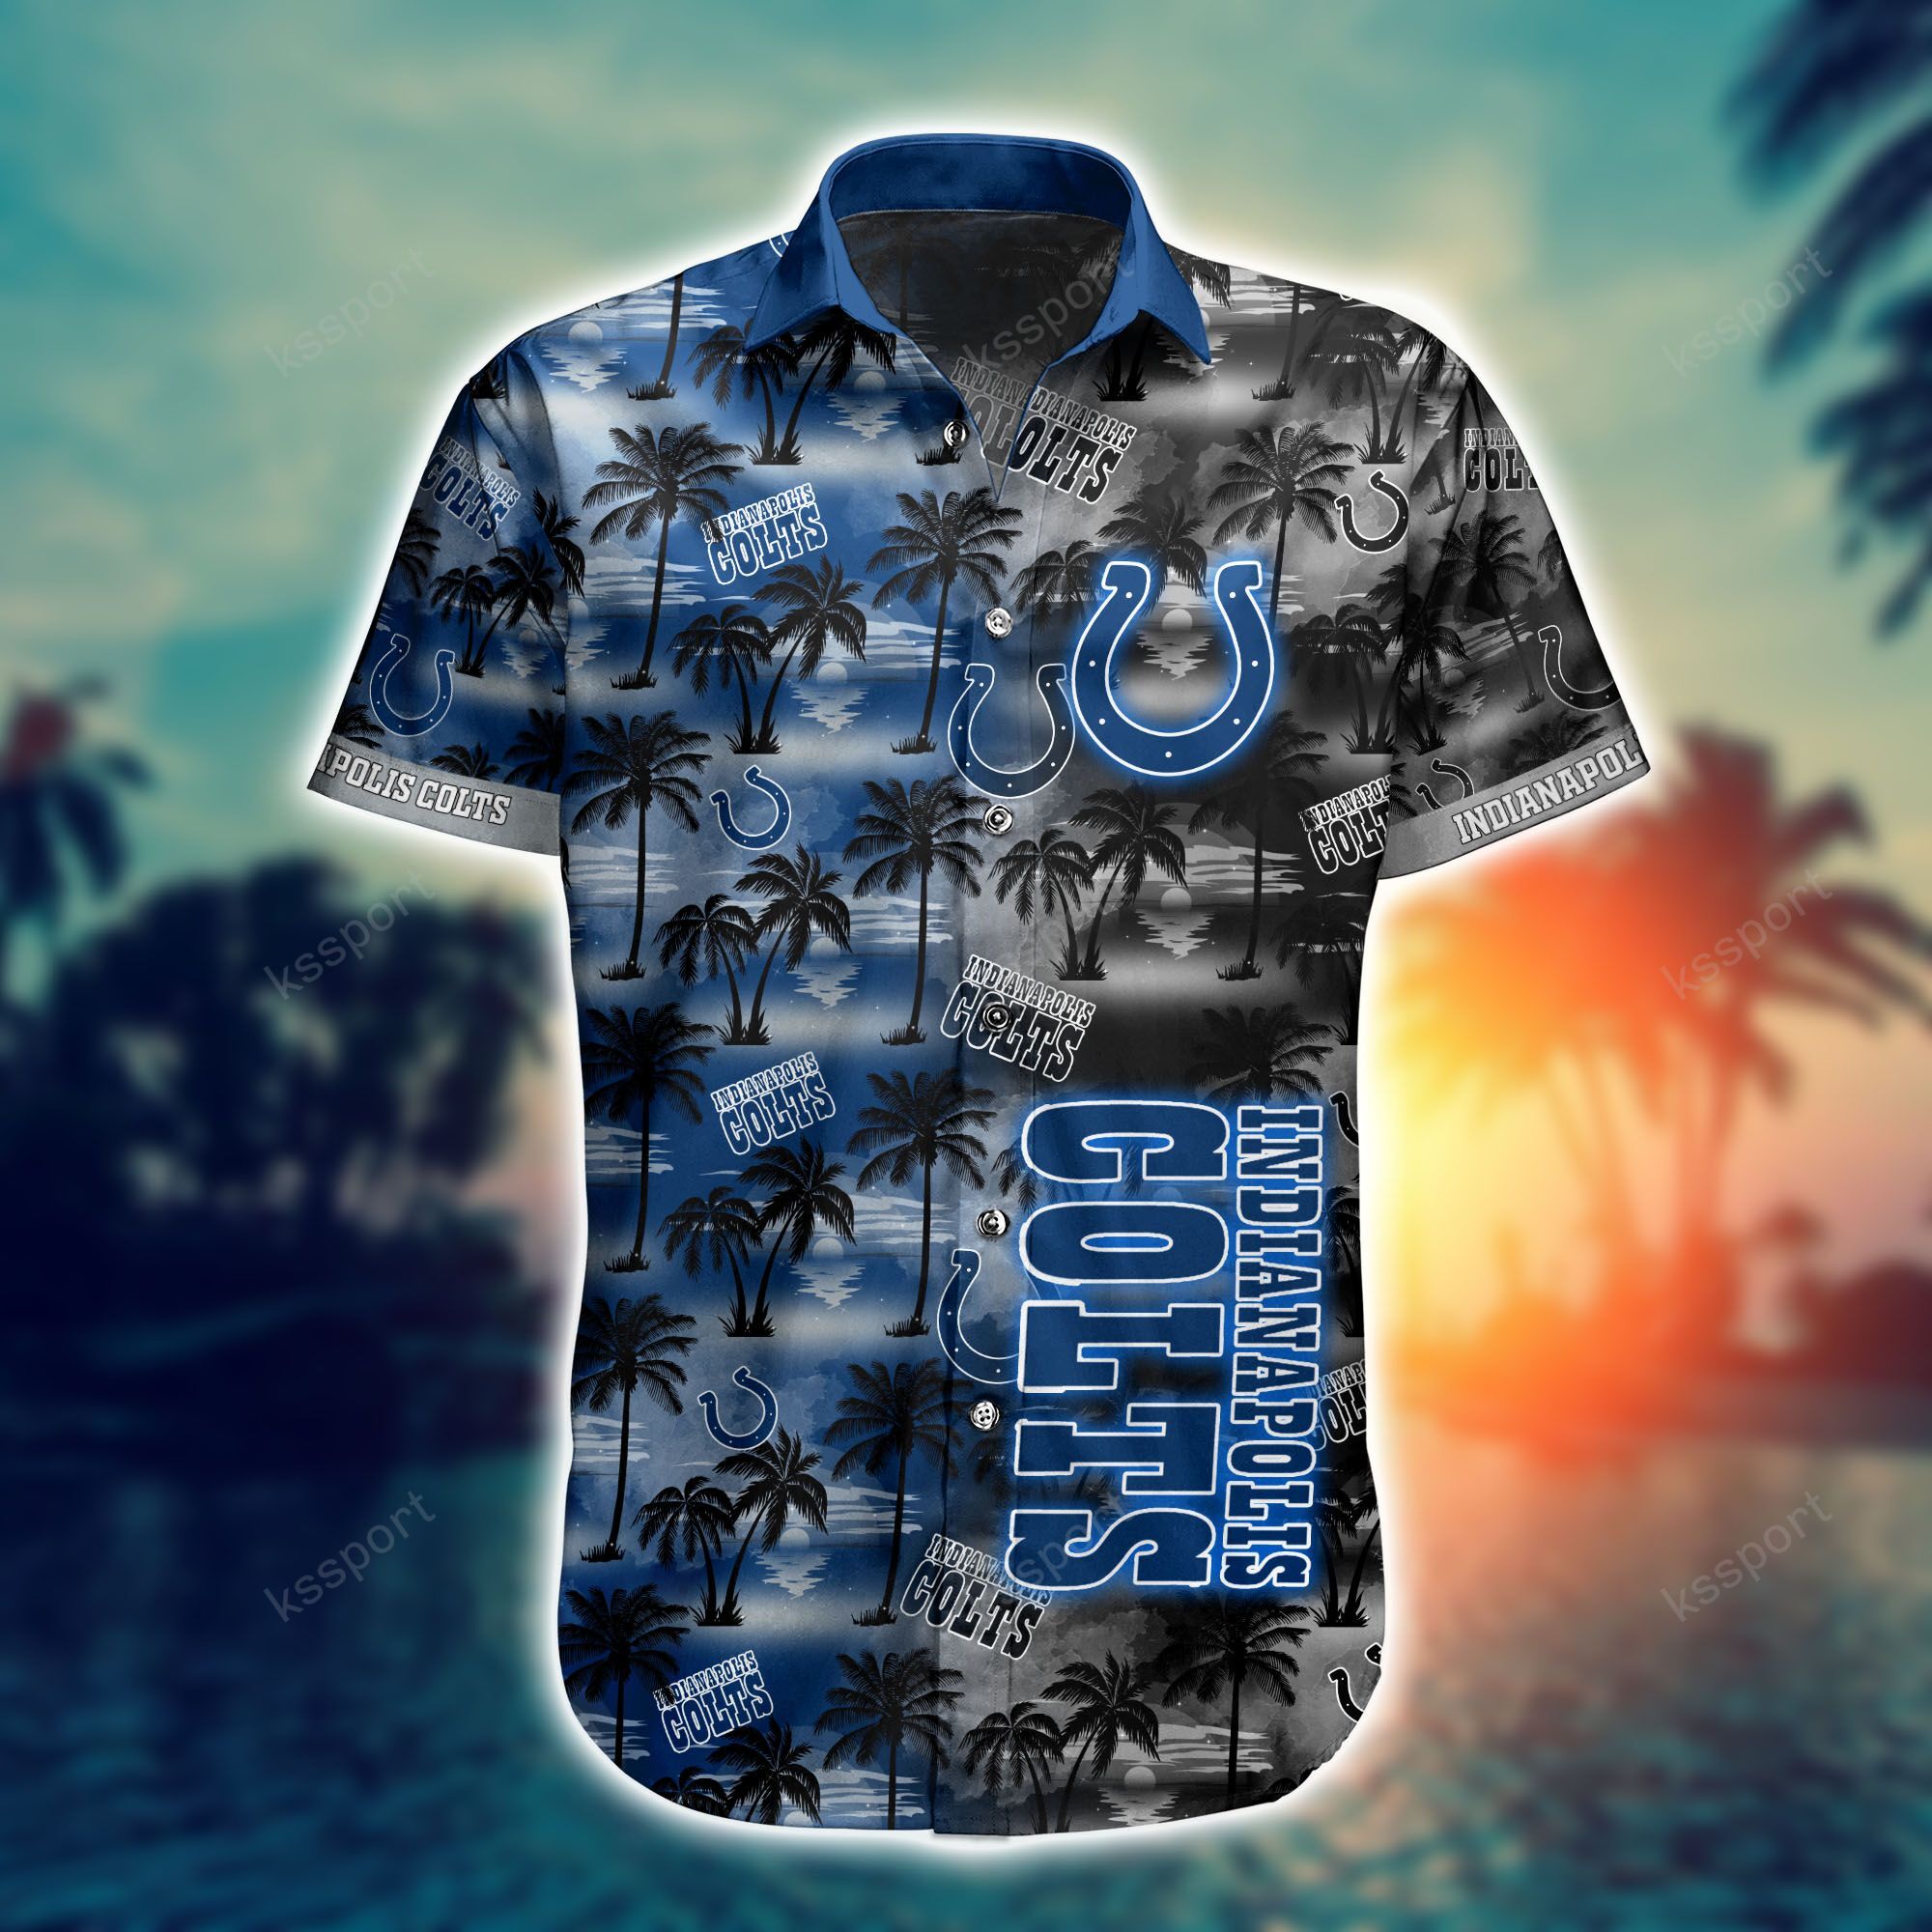 Top cool Hawaiian shirt 2022 - Make sure you get yours today before they run out! 204